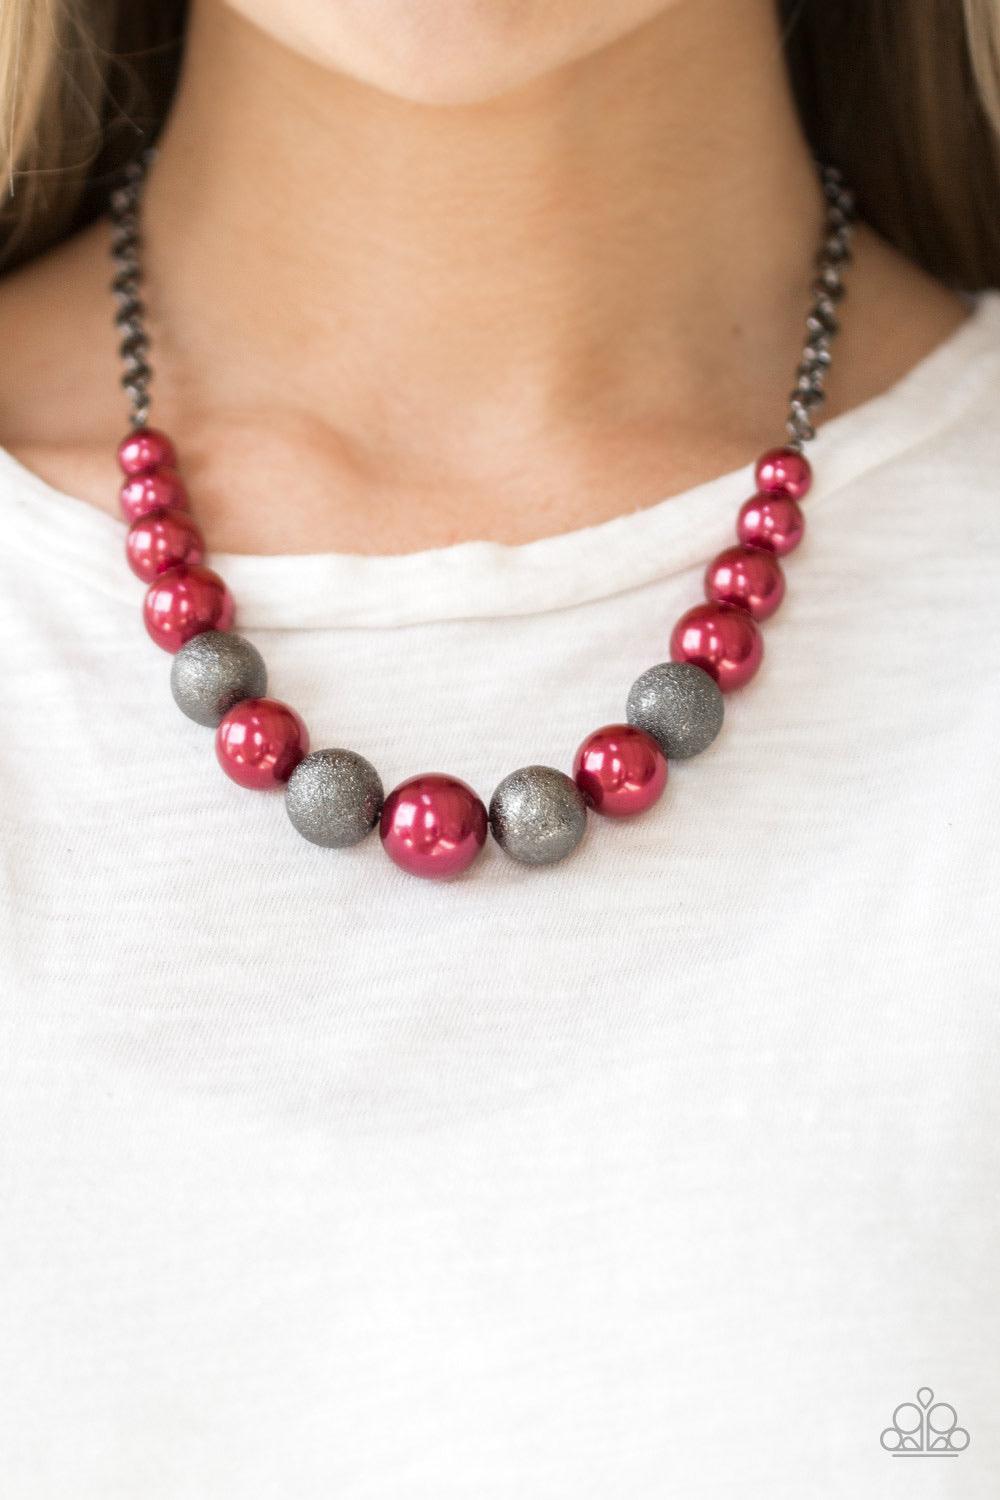 Paparazzi Accessories Color Me CEO - Red Dusted in glitter, sparkling gunmetal and pearly red beads are threaded along an invisible wire below the collar for a glamorous look. Features an adjustable clasp closure. Jewelry